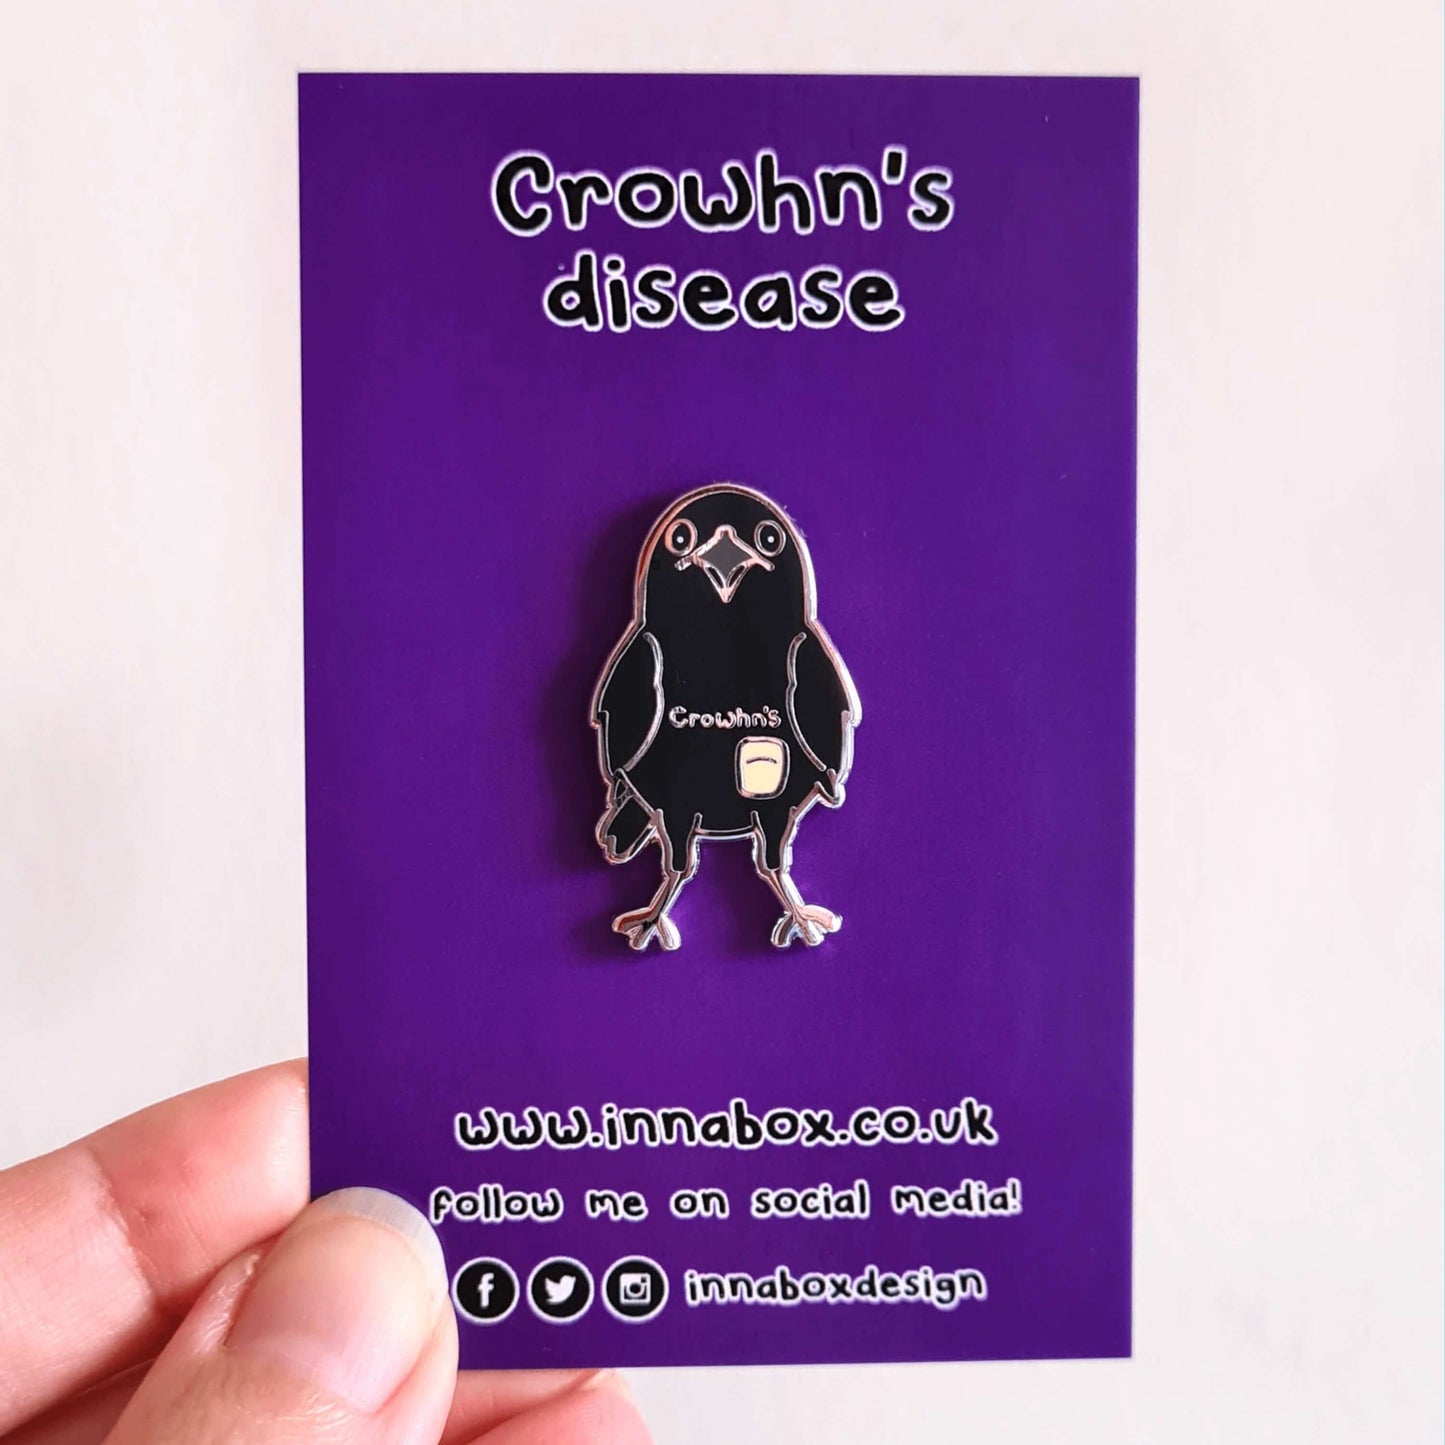 A black crow shaped enamel pin with silver beak, wings and feet. 'Crowhn's' is written in silver on the crow's tummy and there is a colostomy bag underneath the writing on the crow. The pin is attached to it's purple backing card with Innabox social media info at the bottom.